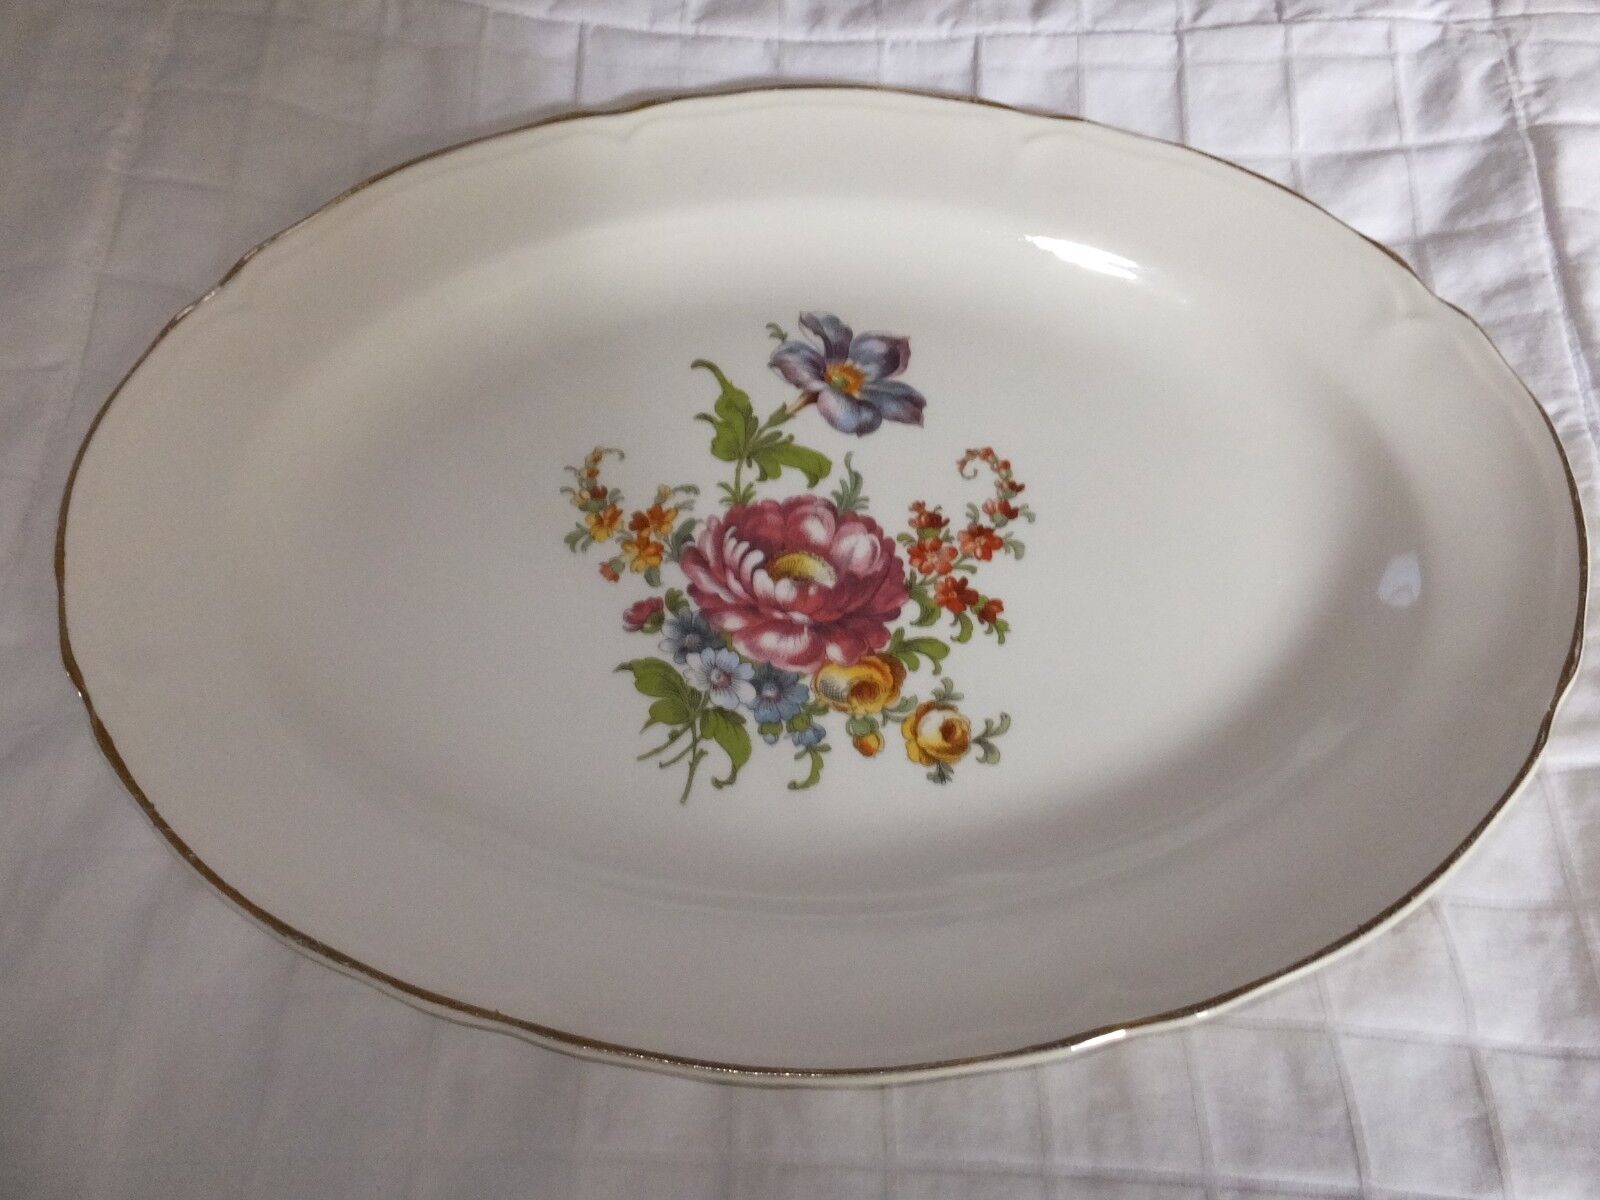   Knowles, platter, Lotus , Cunningham & Pickett, hand decorated Great AAA